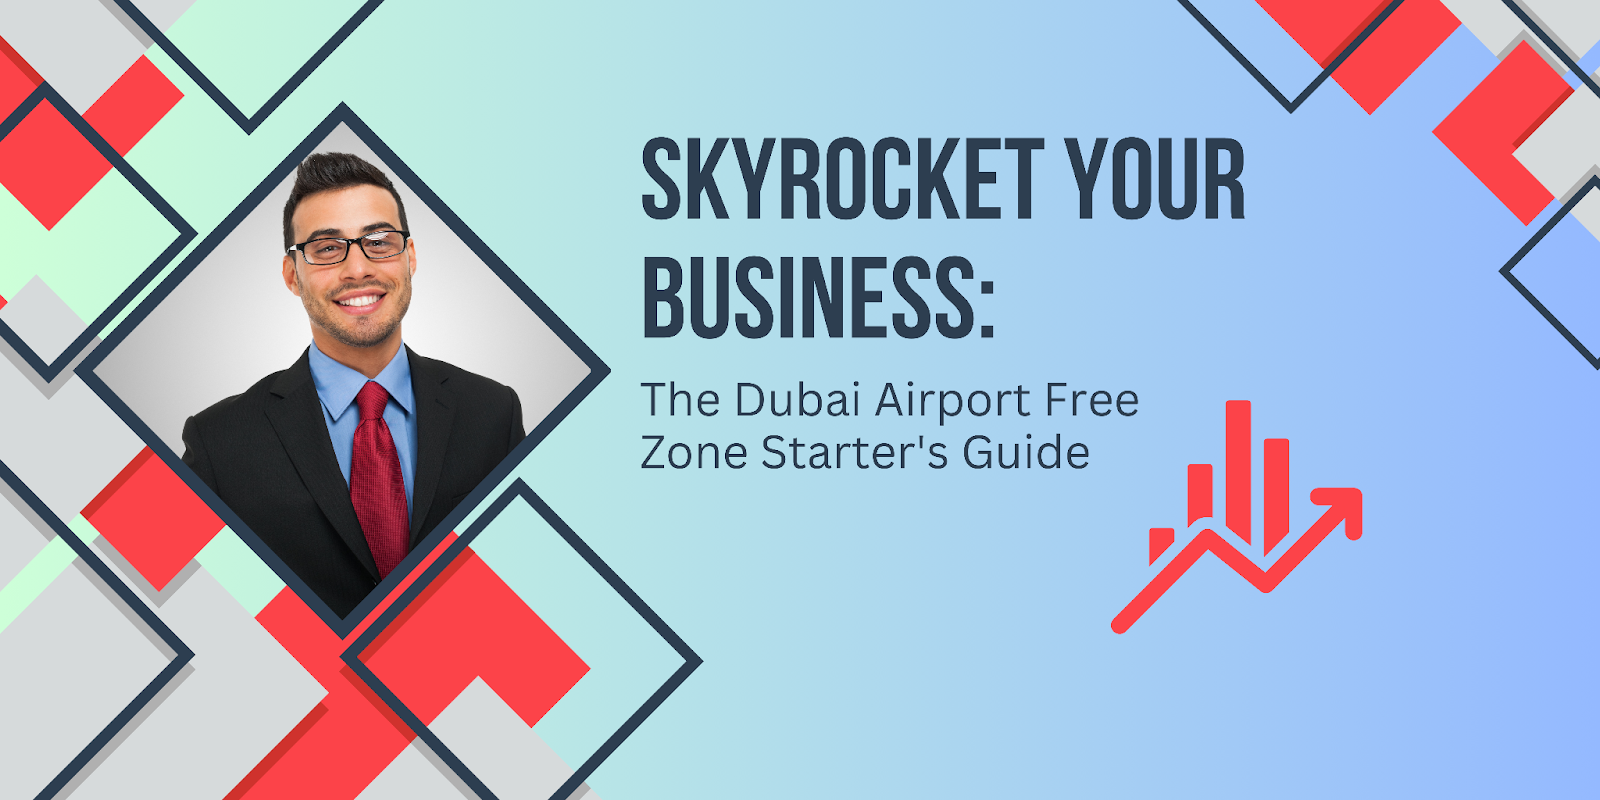 Skyrocket Your Business: The Dubai Airport Free Zone Starter's Guide
